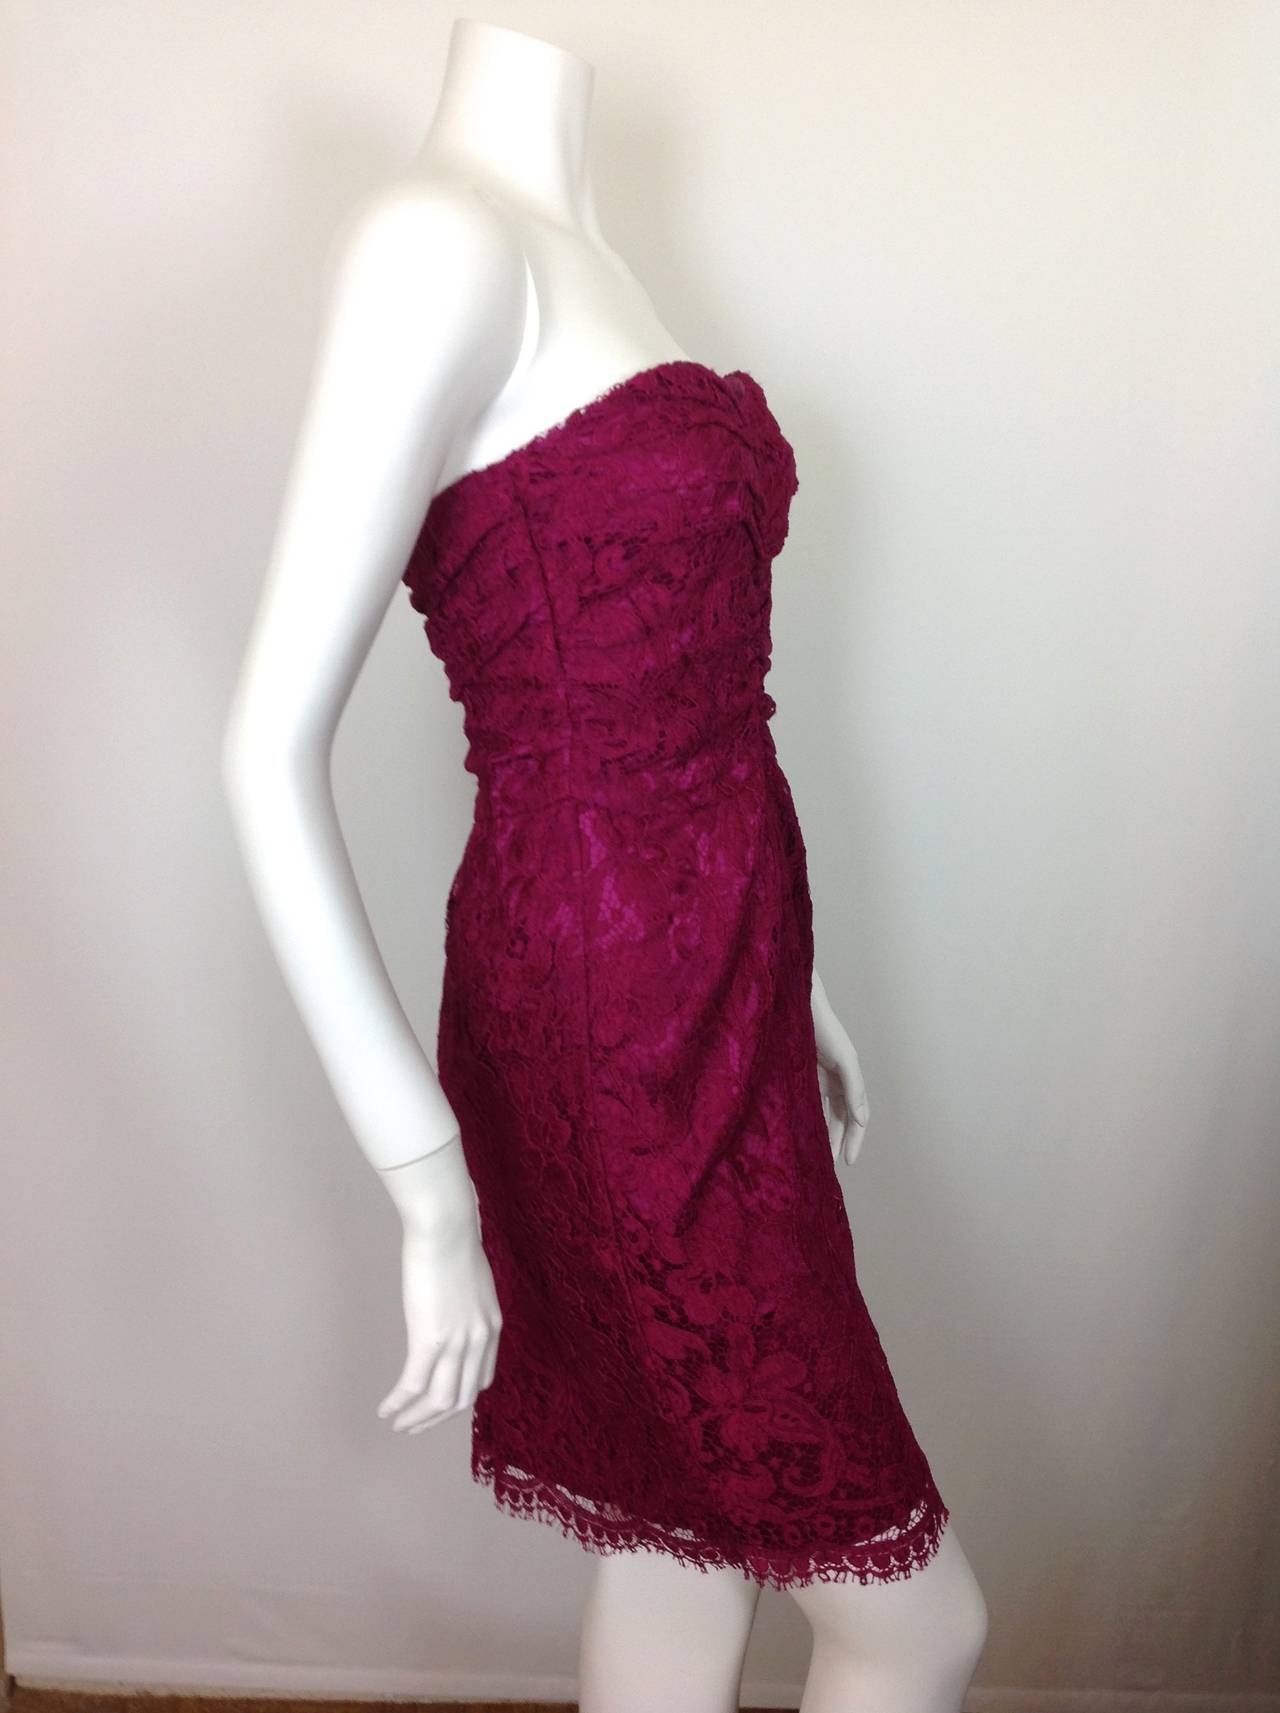 Fuchsia strapless lace Dolce & Gabbana dress.  
Made in Italy of soft lace.  75% cotton, 25% poliamida.
Lined in 96% silk 4% elastane, with a boned, longline padded bra.
13 1/2